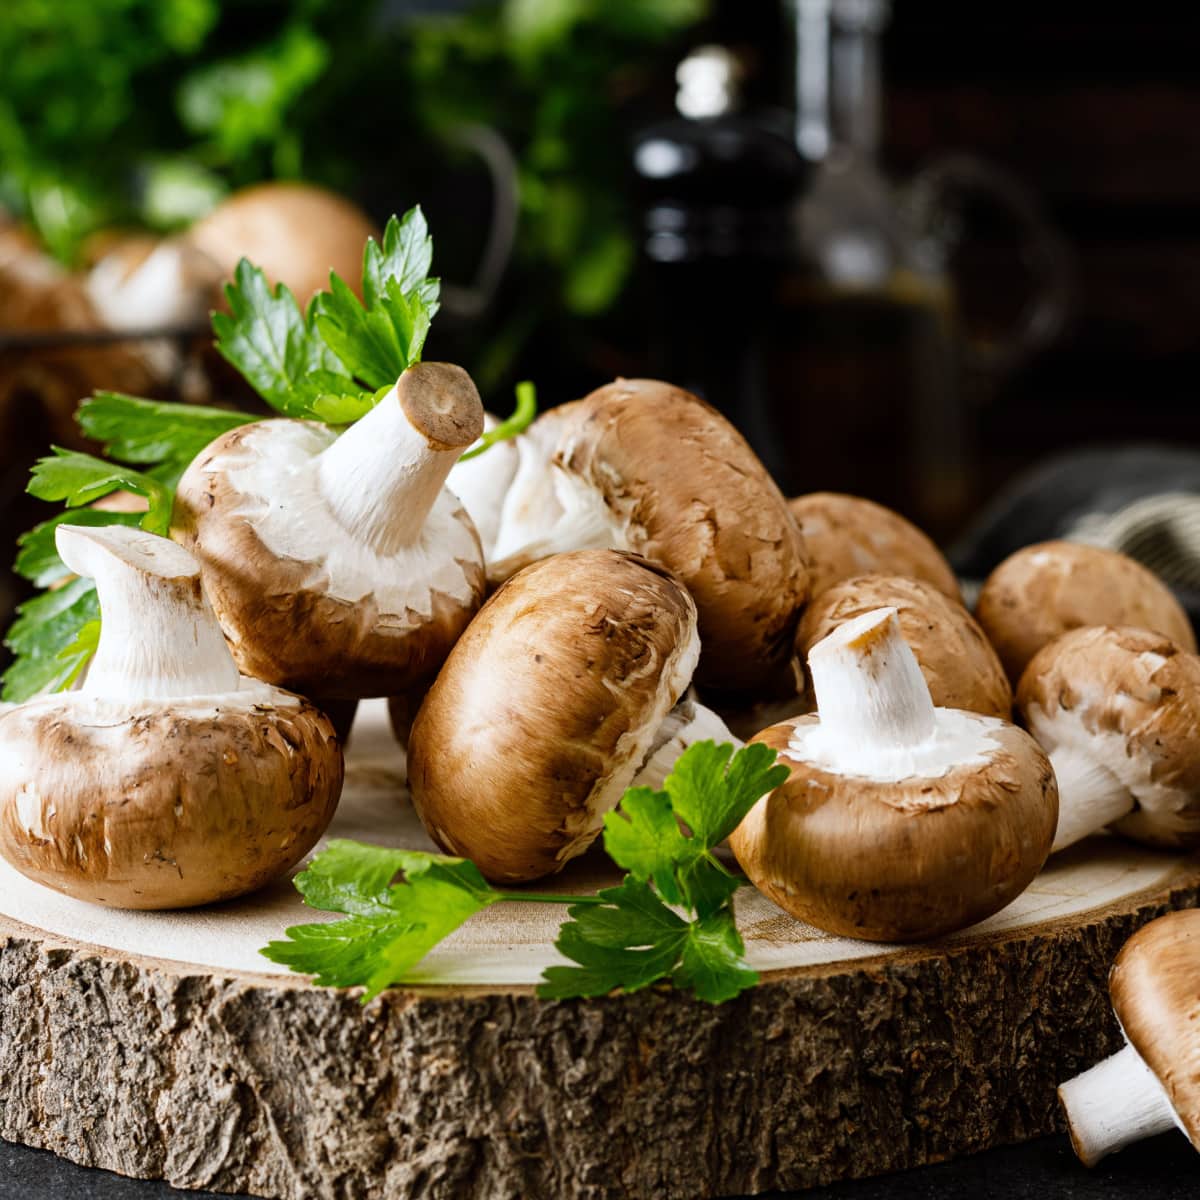 Bunch of Mushrooms on a Wooden Chopping Board